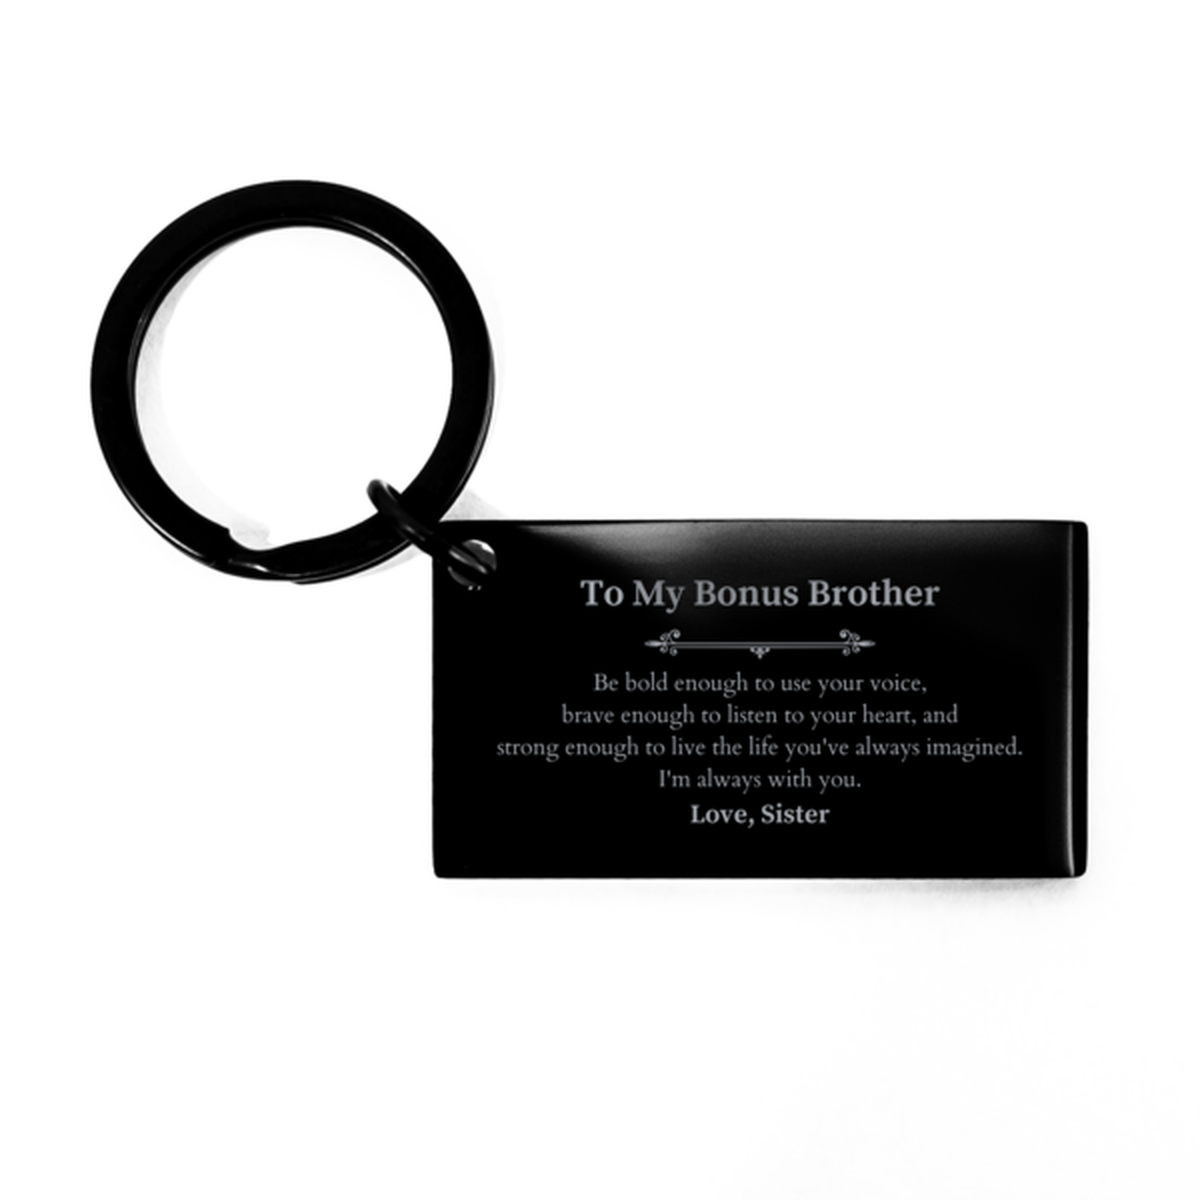 Keepsake Bonus Brother Keychain Gift Idea Graduation Christmas Birthday Bonus Brother from Sister, Bonus Brother Be bold enough to use your voice, brave enough to listen to your heart. Love, Sister